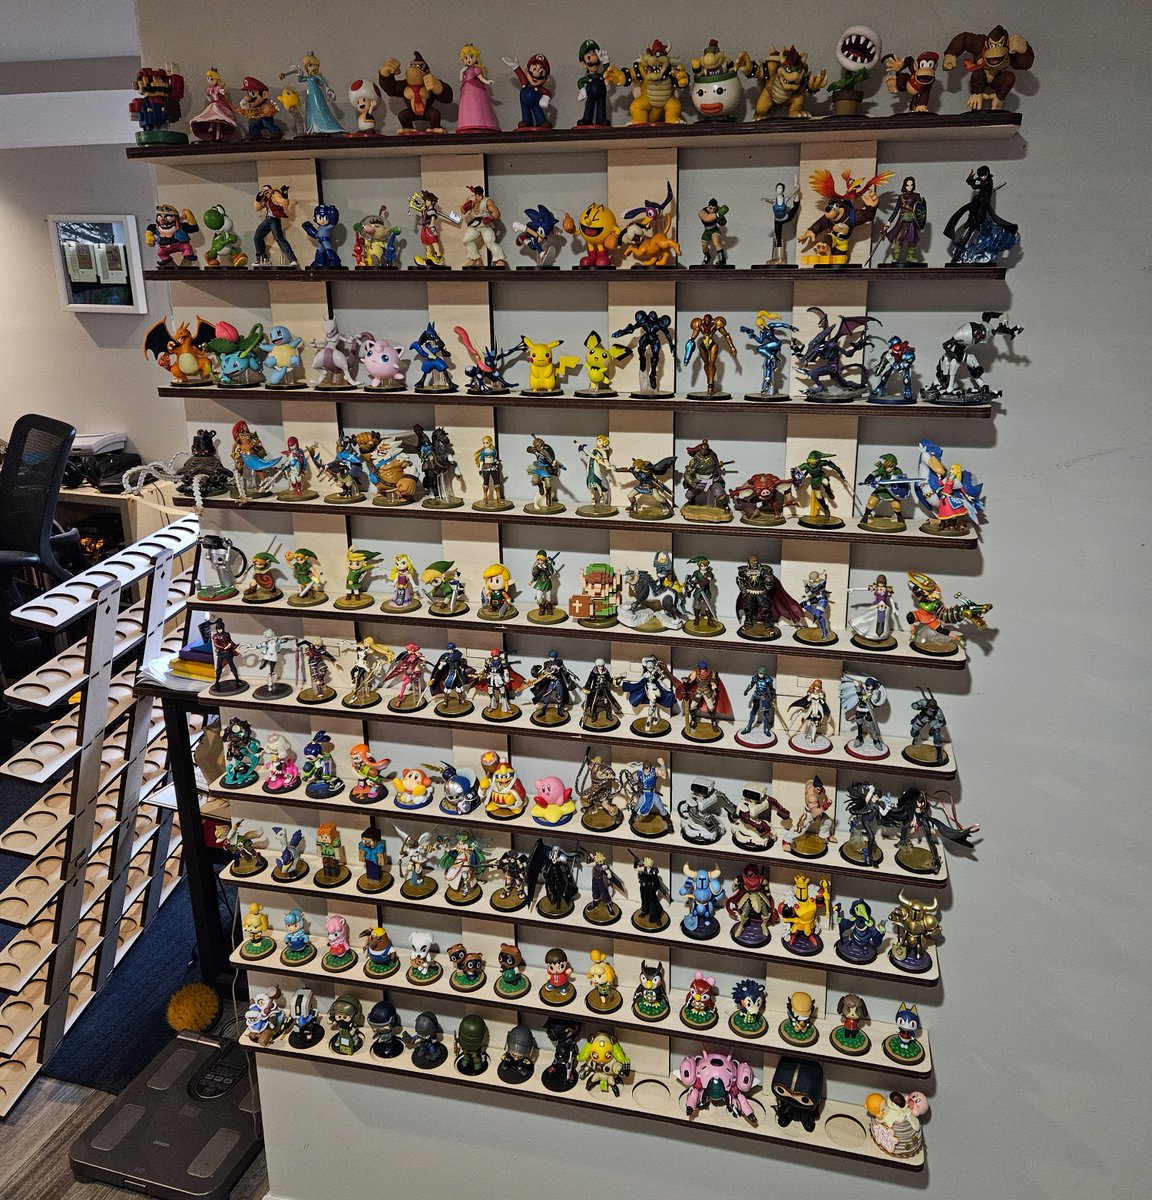 150 Amiibo? The stands just keep growing larger! We've gotten more custom requests for larger stands and this one is quite the chonky setup. Can we keep justifying our purchase of more Amiibo in the name of filling out larger stands for social media? #amiibo #amiibocollection